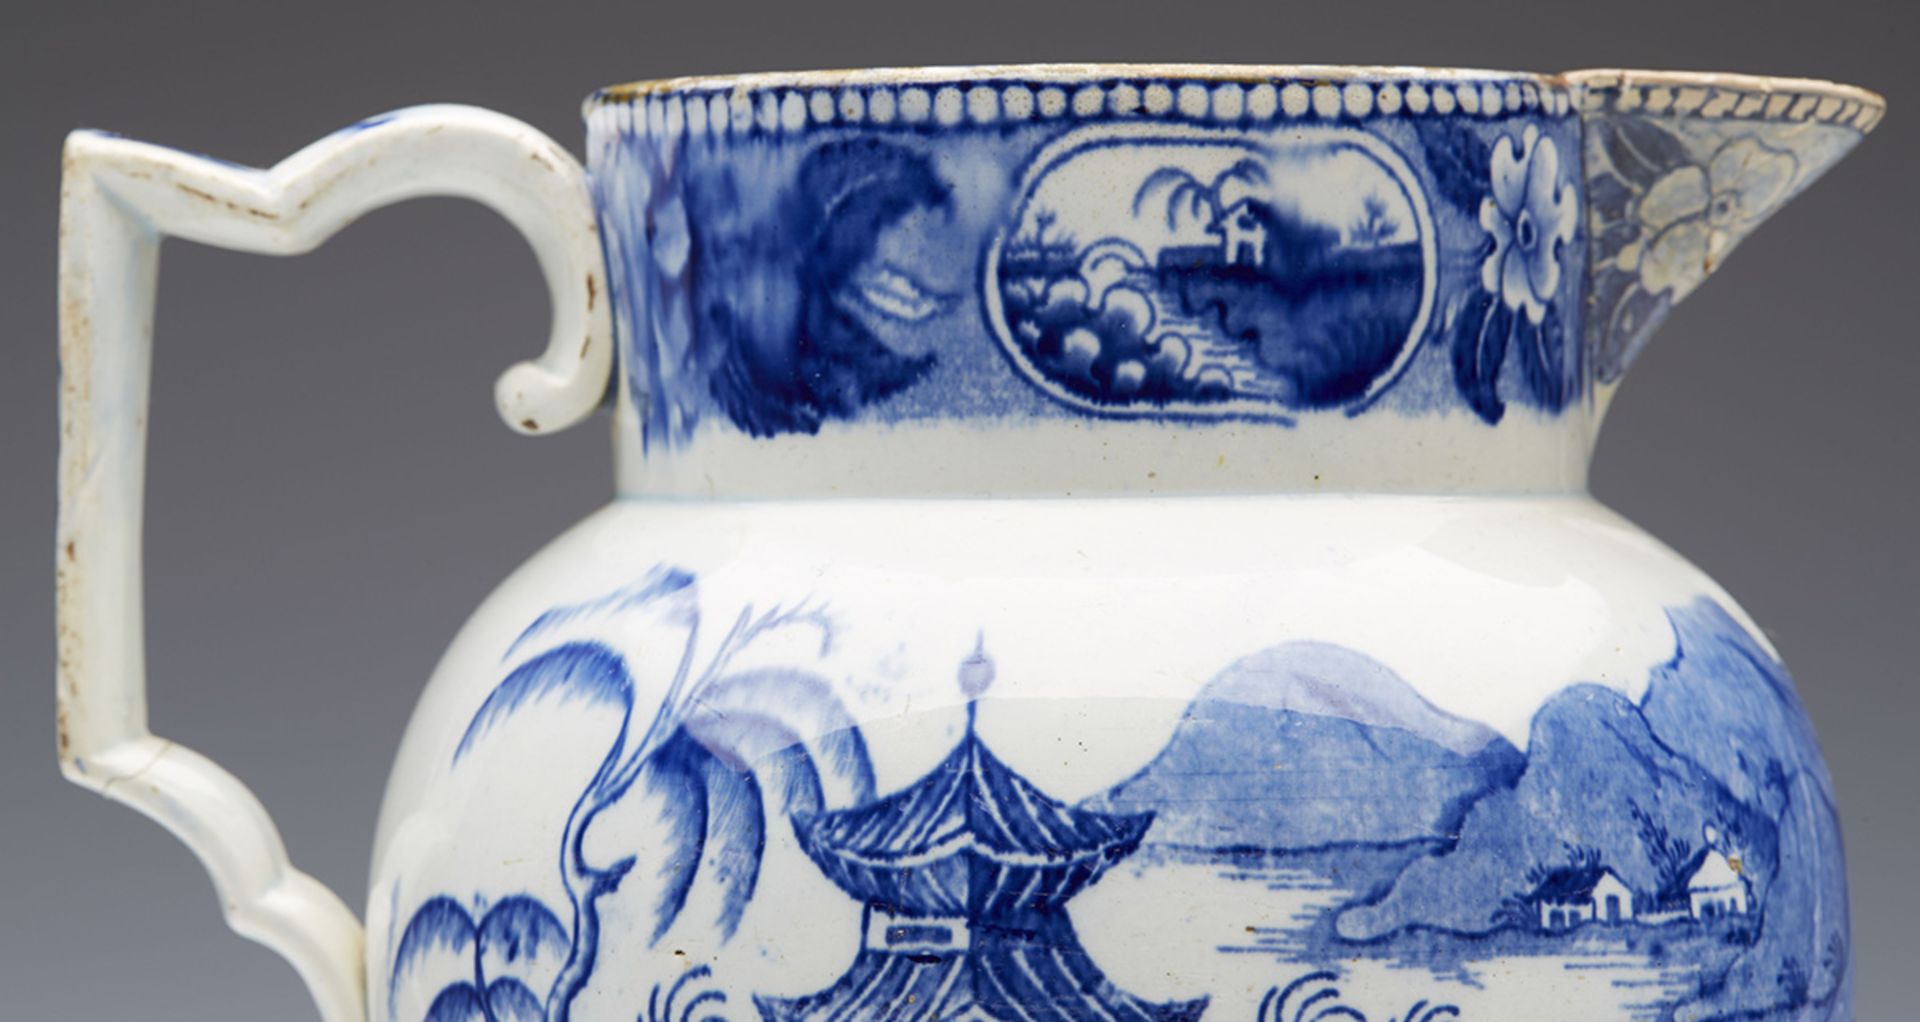 ANTIQUE ENGLISH PEARLWARE BLUE & WHITE CHINOISERIE HANDLED JUG LATE 18TH C. - Image 2 of 8